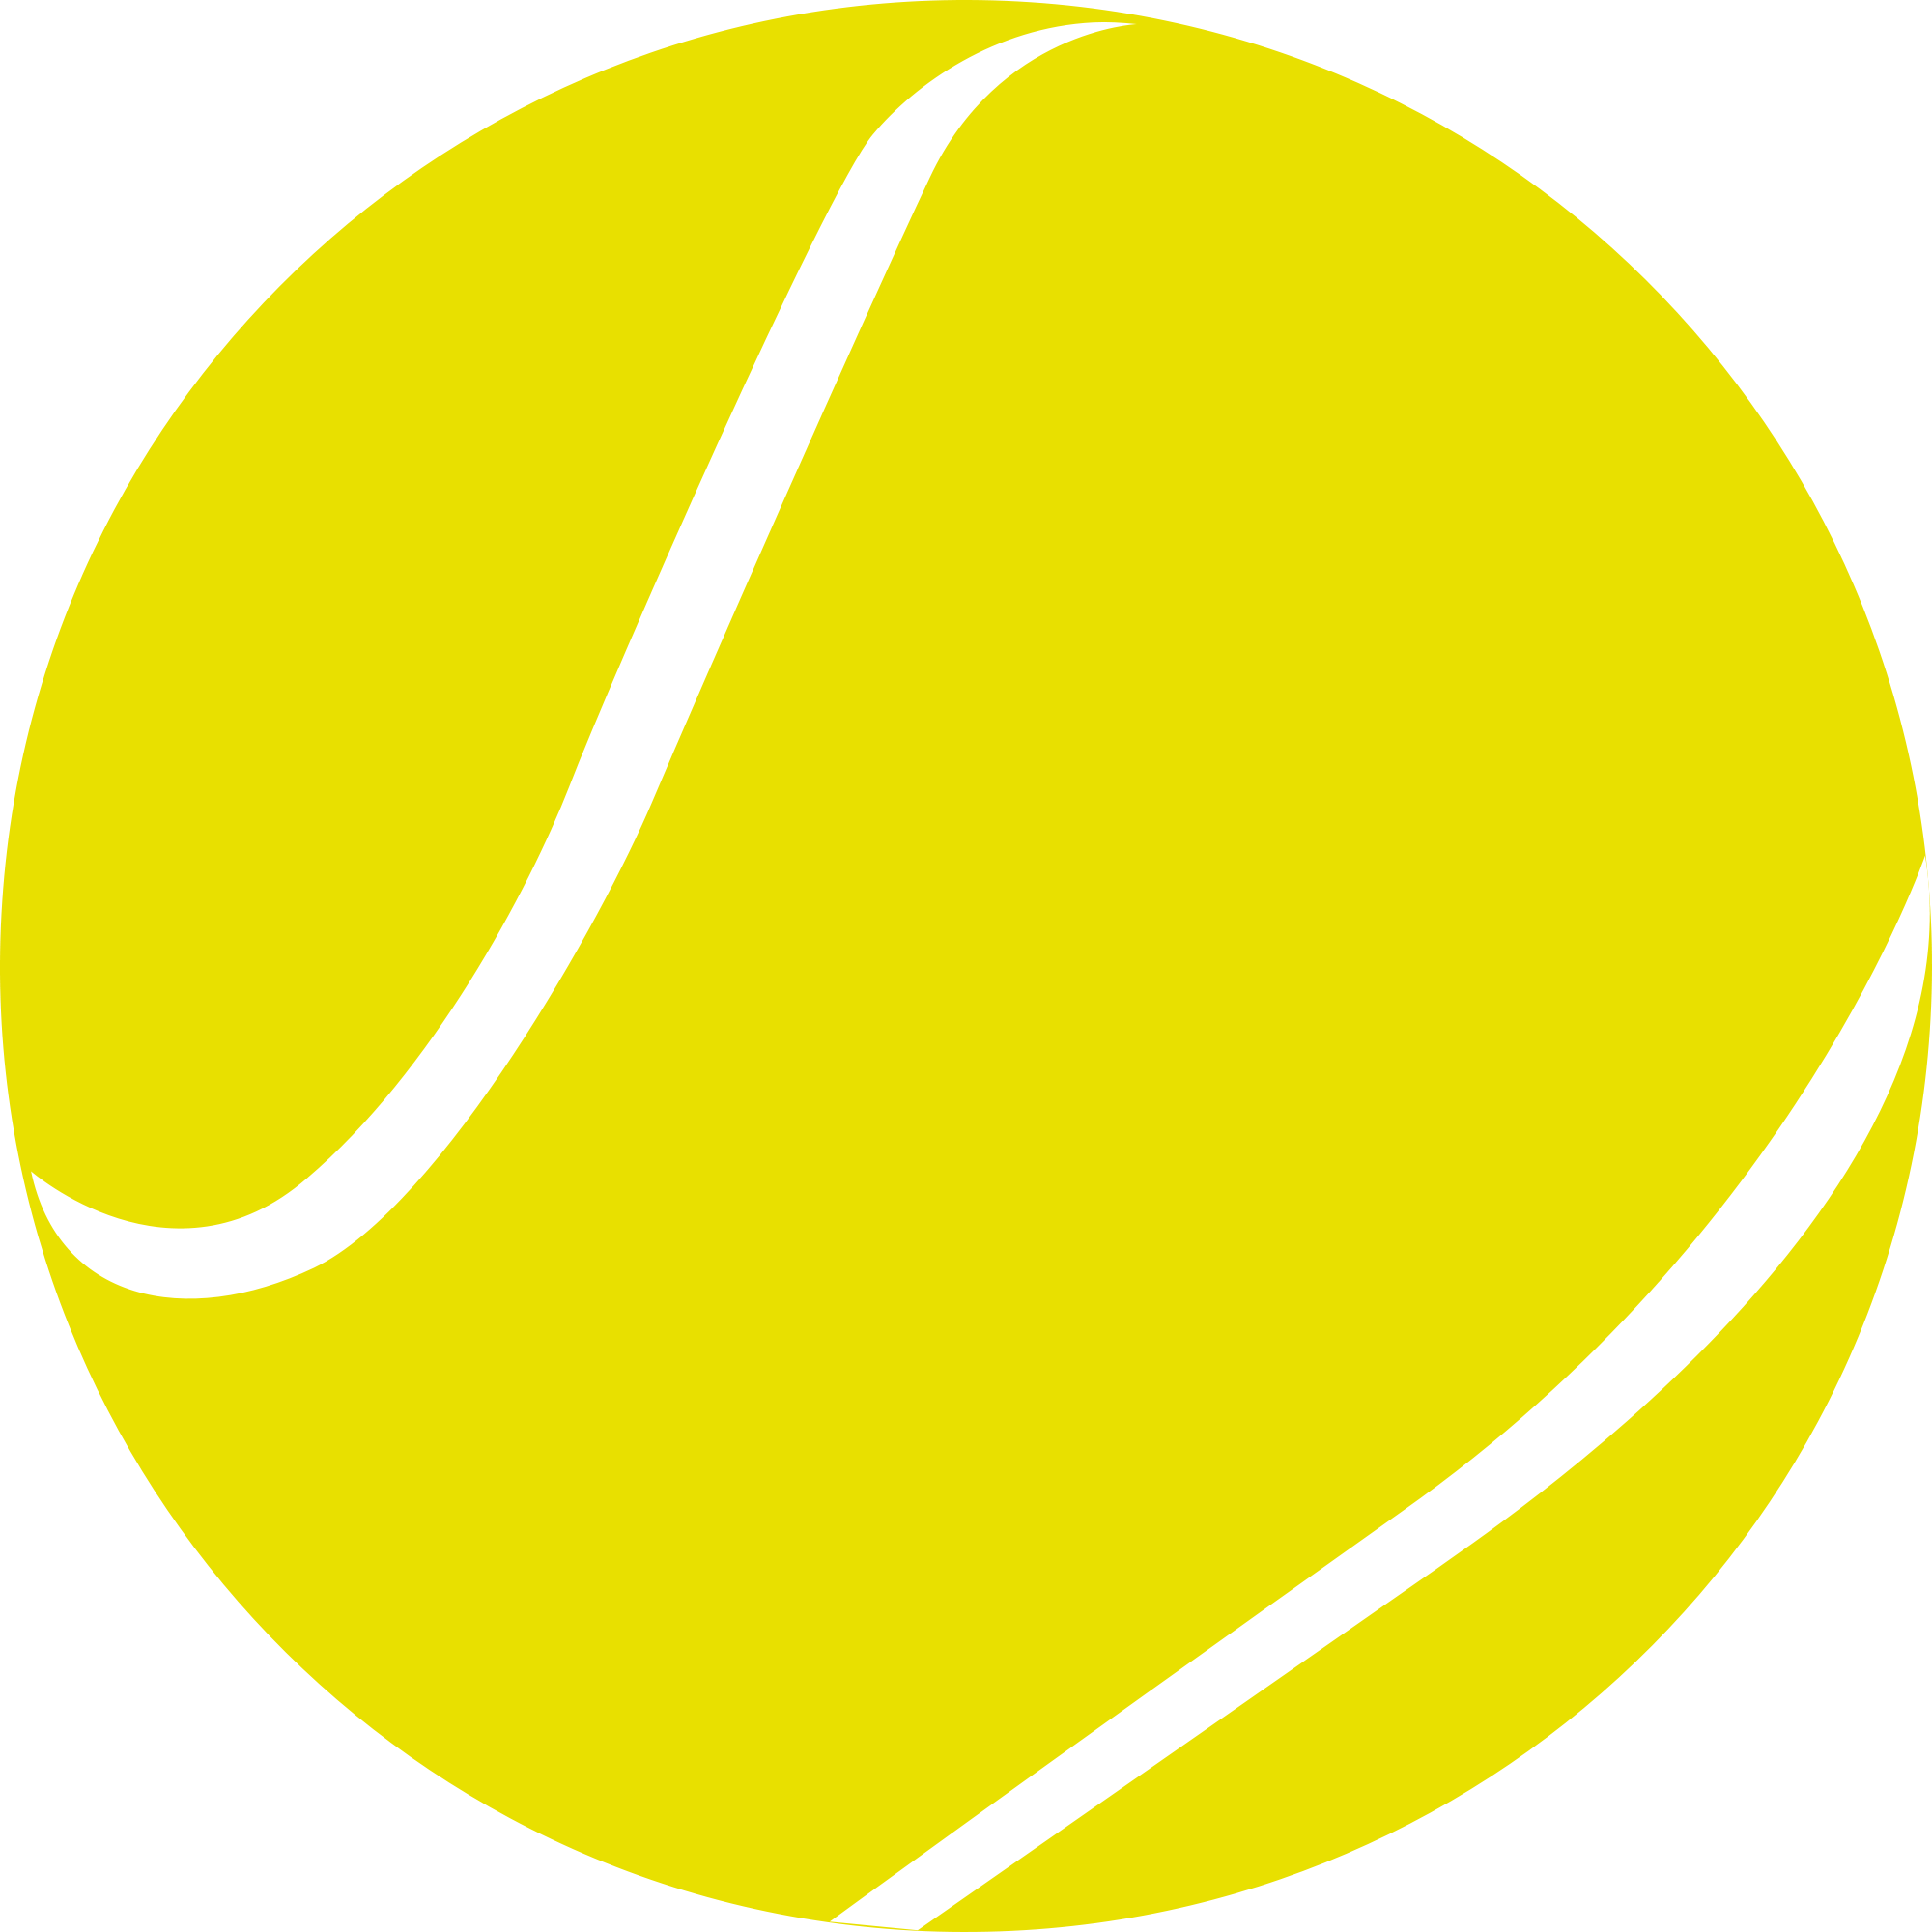 Free Tennis Ball PNG Transparent Images, Download Free Clip.